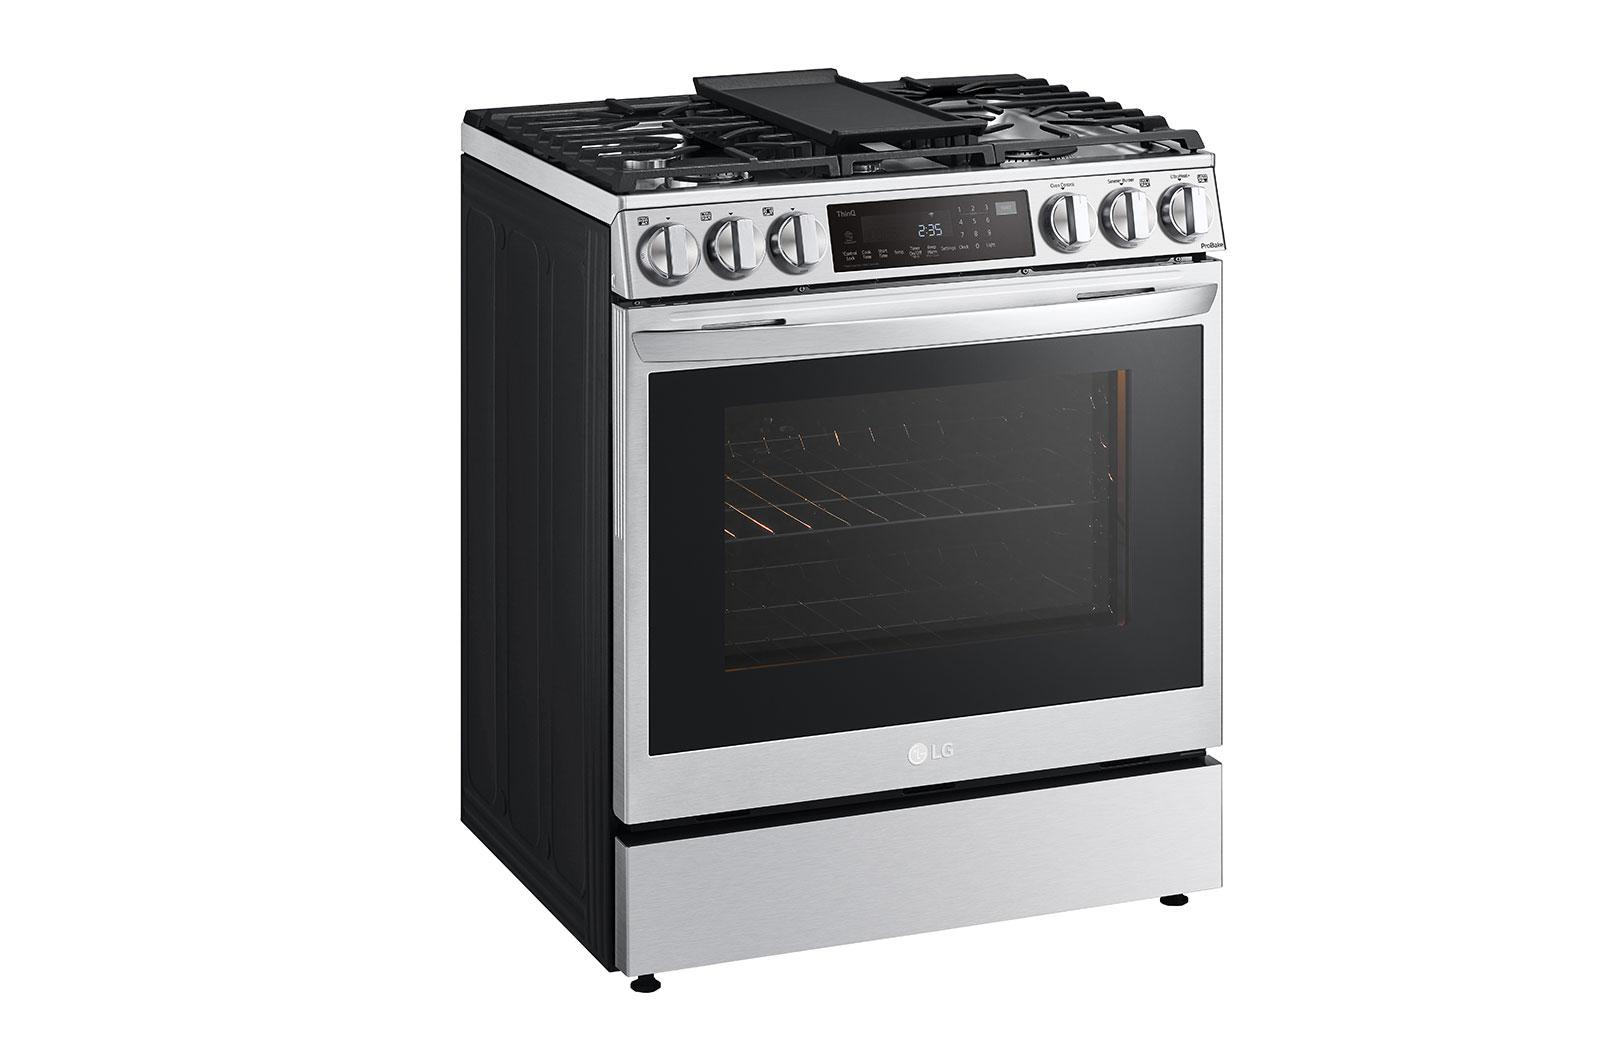 Lg 6.3 cu. ft. Smart wi-fi Enabled ProBake® Convection InstaView® Dual Fuel Slide-In Range with Air Fry